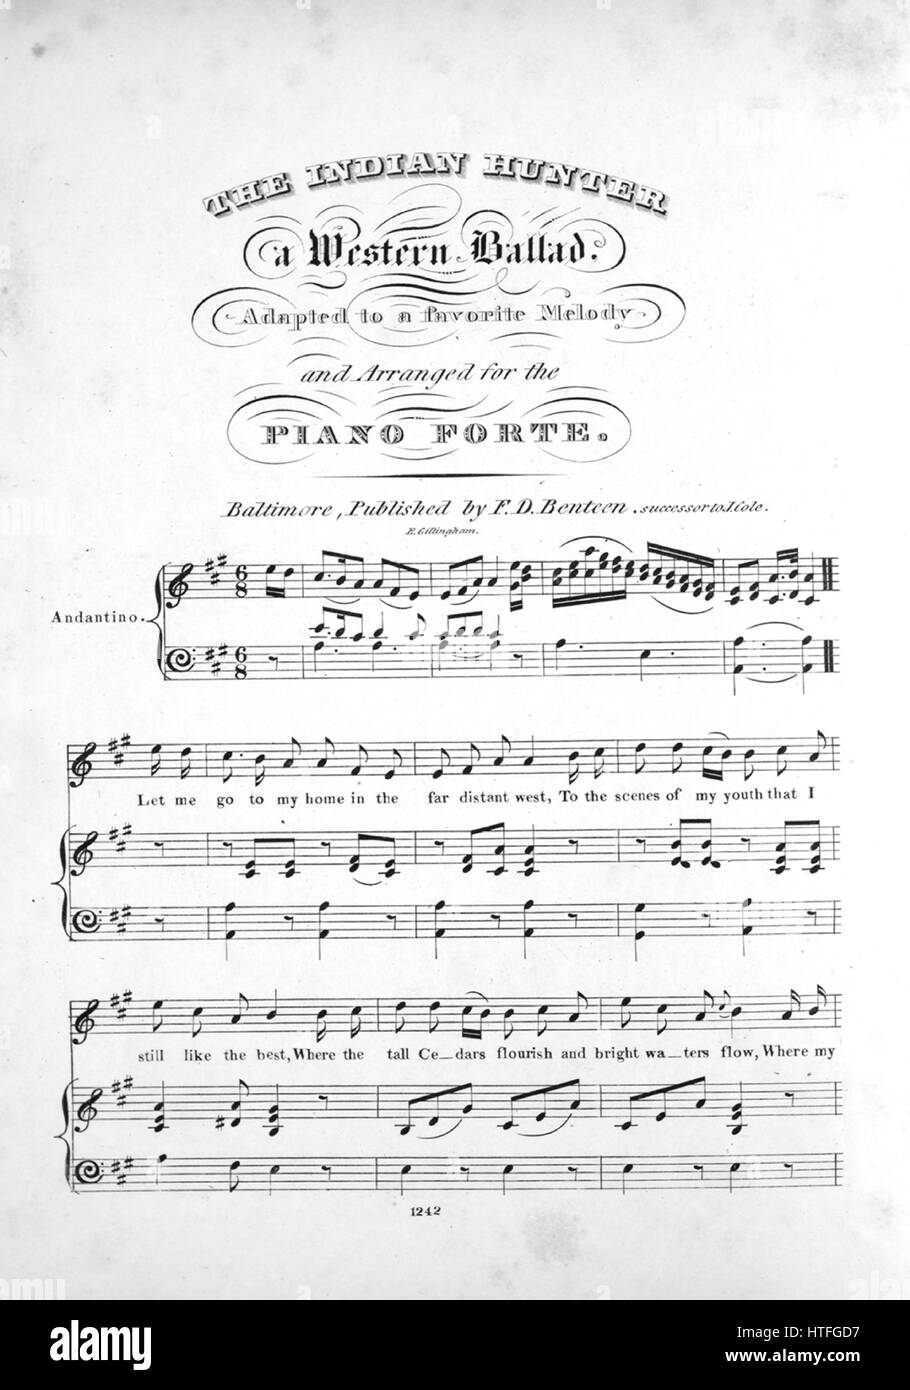 Sheet music cover image of the song 'The Indian Hunter A Western Ballad',  with original authorship notes reading 'Adapted to a favorite Melody and  Arranged for the Piano Forte [na]', United States,